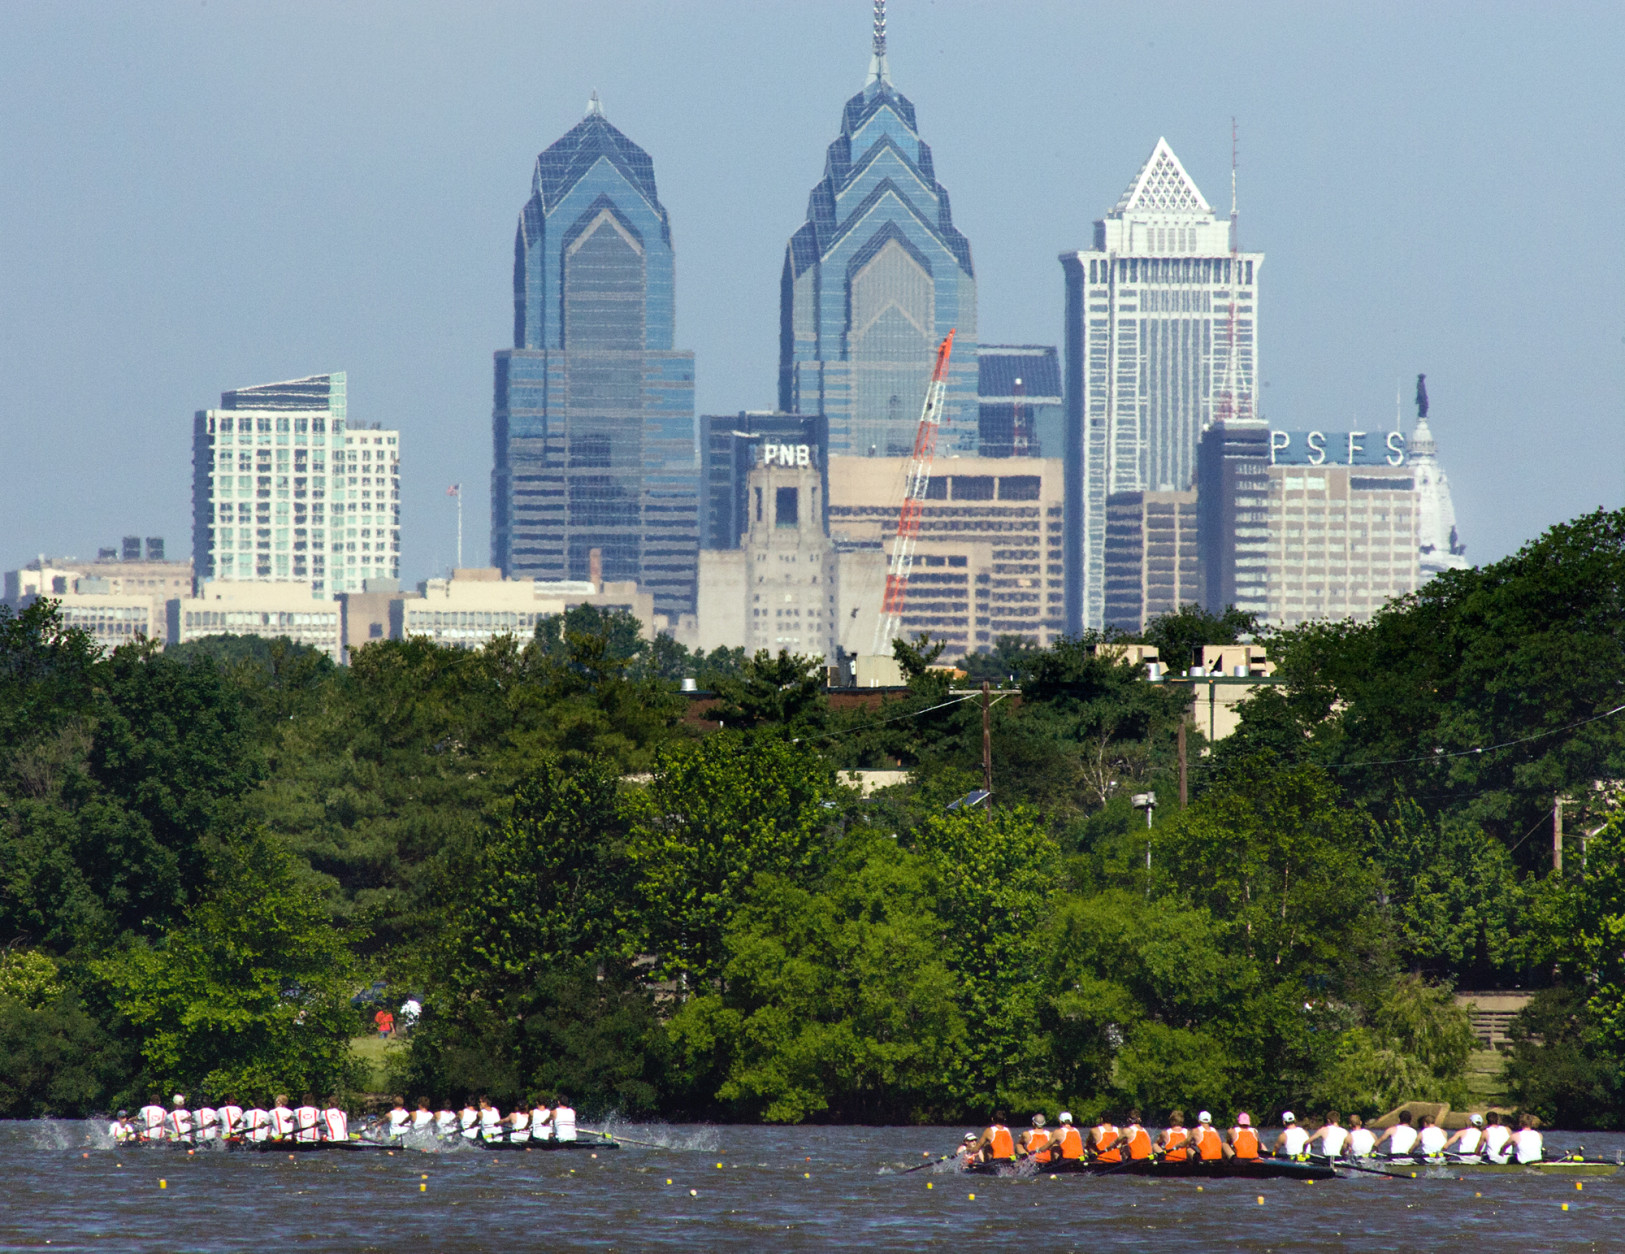 FILE - In this June 2, 2011 file photo, the skyline of downtown Philadelphia is seen from Camden, N.J. Democrats have picked Philadelphia as the site of their 2016 national convention. It's a patriotic backdrop for the nomination of the party's next presidential candidate. The Democratic National Committee says the convention will be held the week of July 25, 2016.  (AP Photo/Tom Mihalek, File)